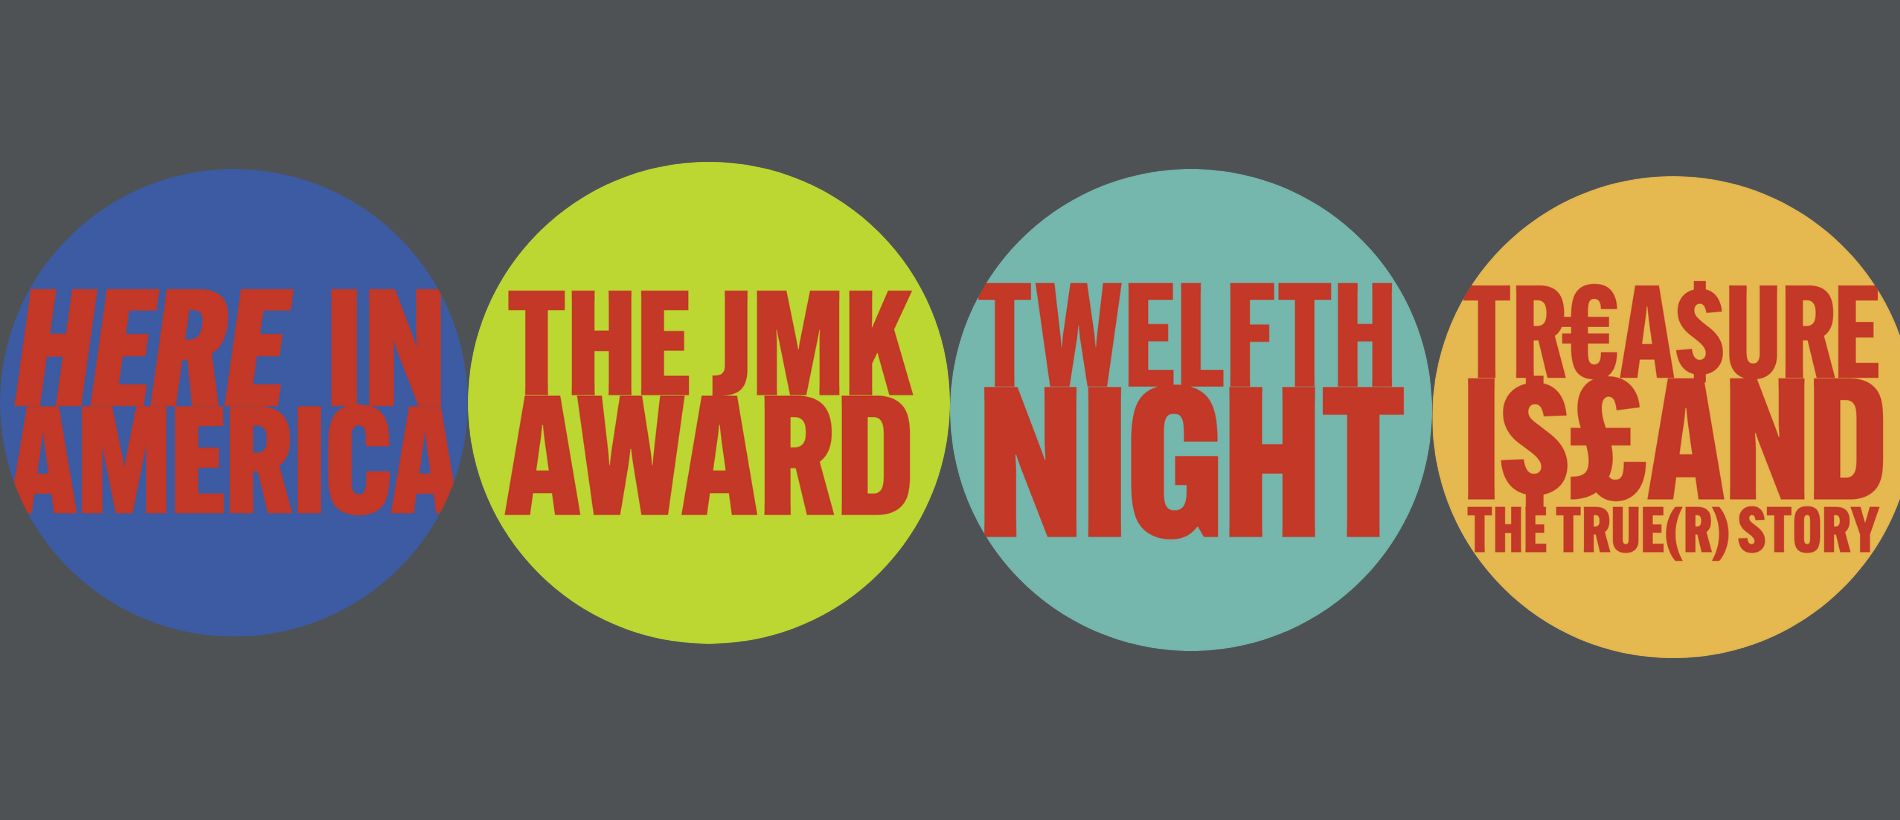 From left to right: red text on blue background "Here in America" logo, red text on green background "The JMK Award" logo, red text on light blue background "Twelfth Night" logo, red text on orange background "Treasure Island The True(r) Story" logo